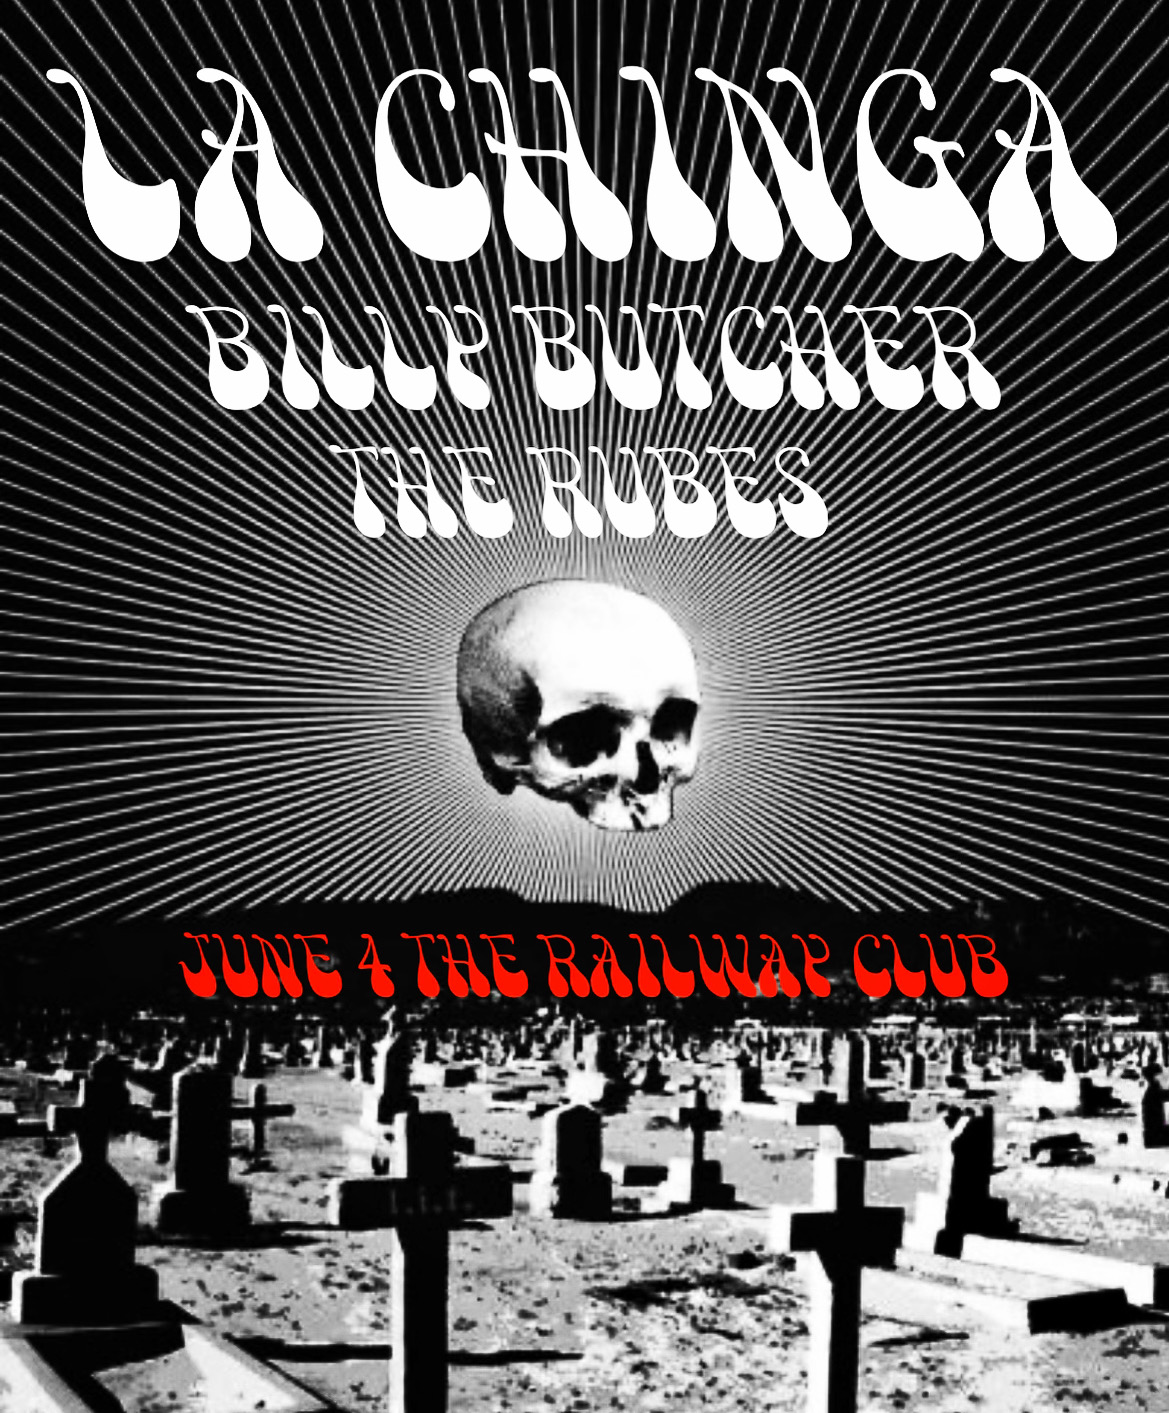 La Chinga With Special Guests, Billy Butcher, and The Rubes